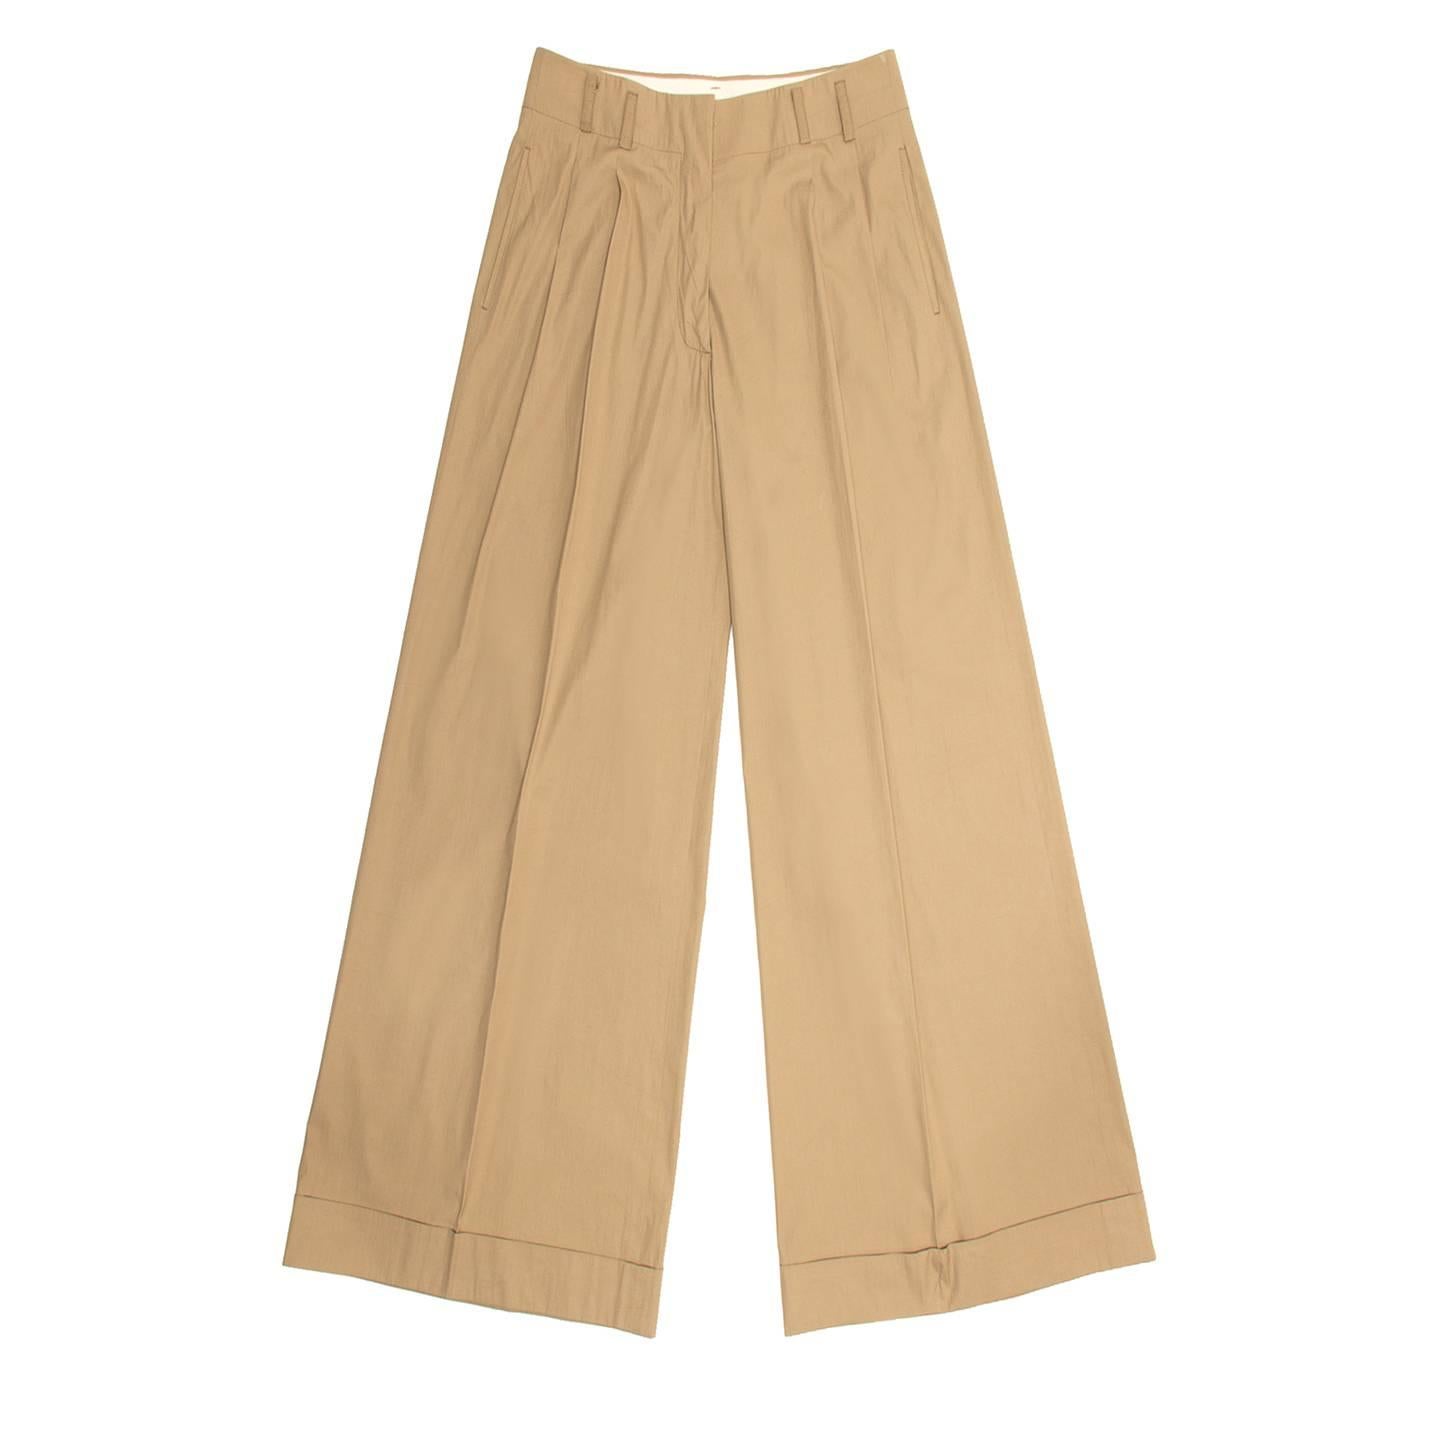 Khaki light cotton blend palazzo trousers with very wide legs and turn-ups at hem. The pants are pleated, the front is flat and a hidden hook fastens the waist band, which is enriched by small belt loops. Slash pockets sit at front side seams, while